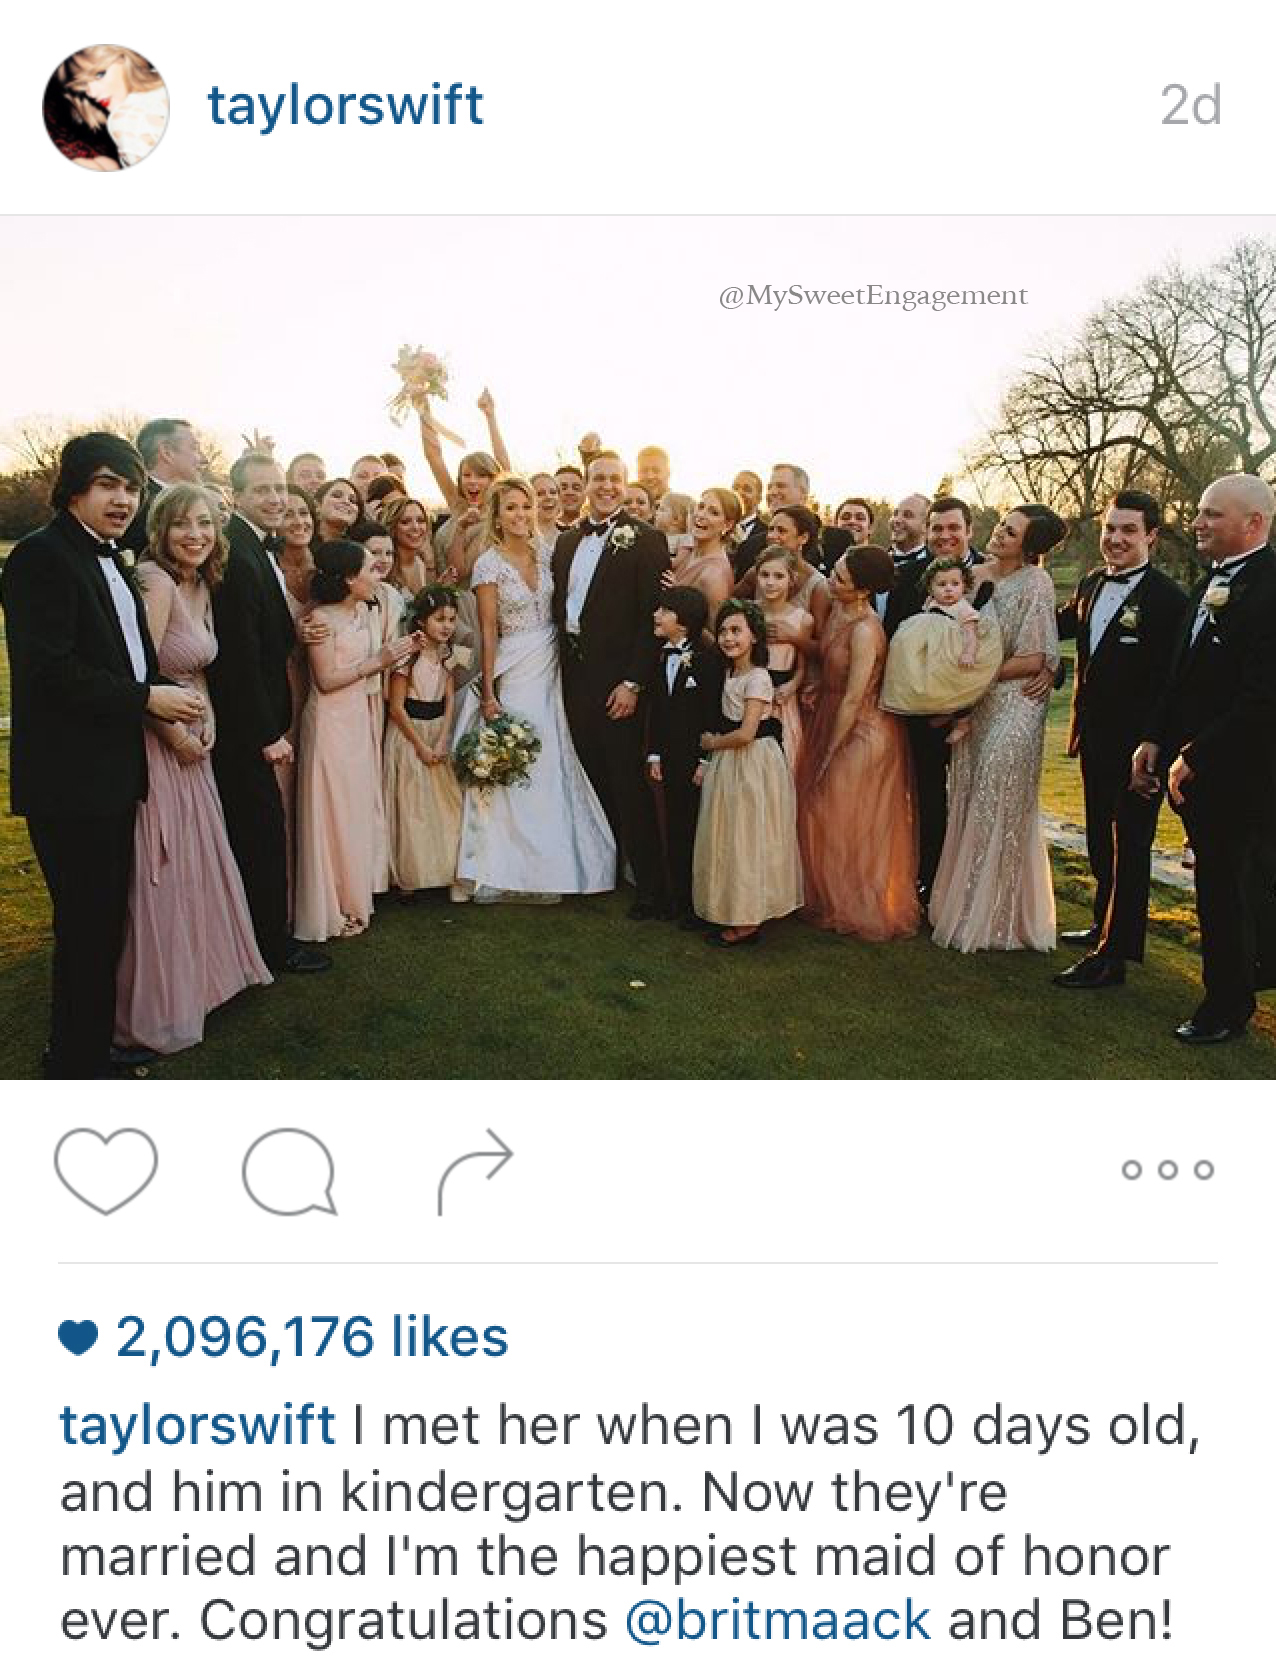 Taylor Swift at her best friend wedding as maid of honor. Bridal party with bride and groom